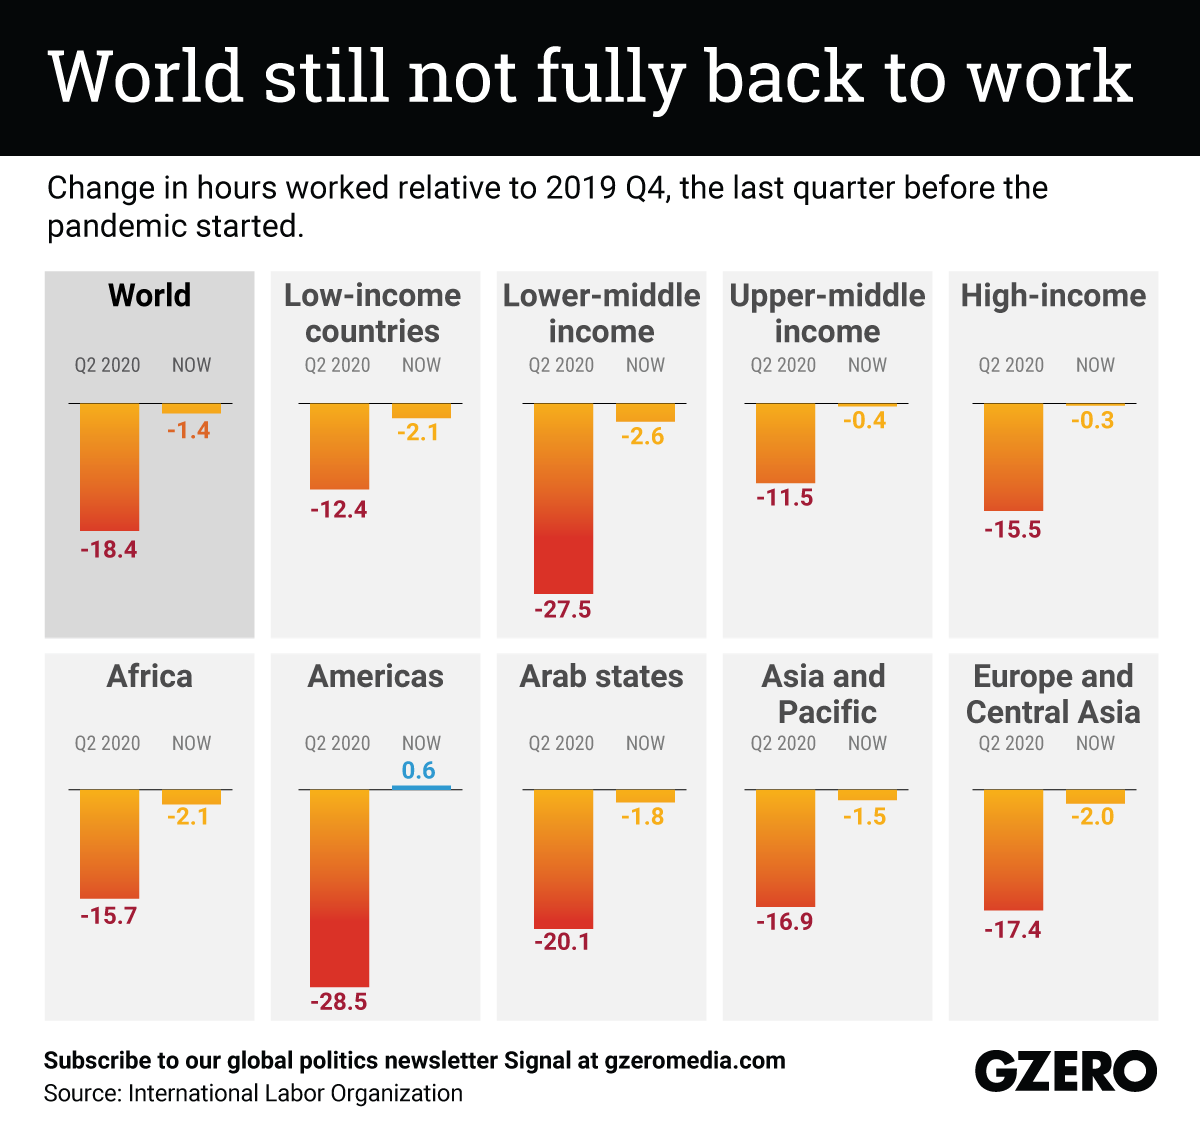 Bar charts showing change in number of hours worked before and after pandemic in select global regions and income groups.